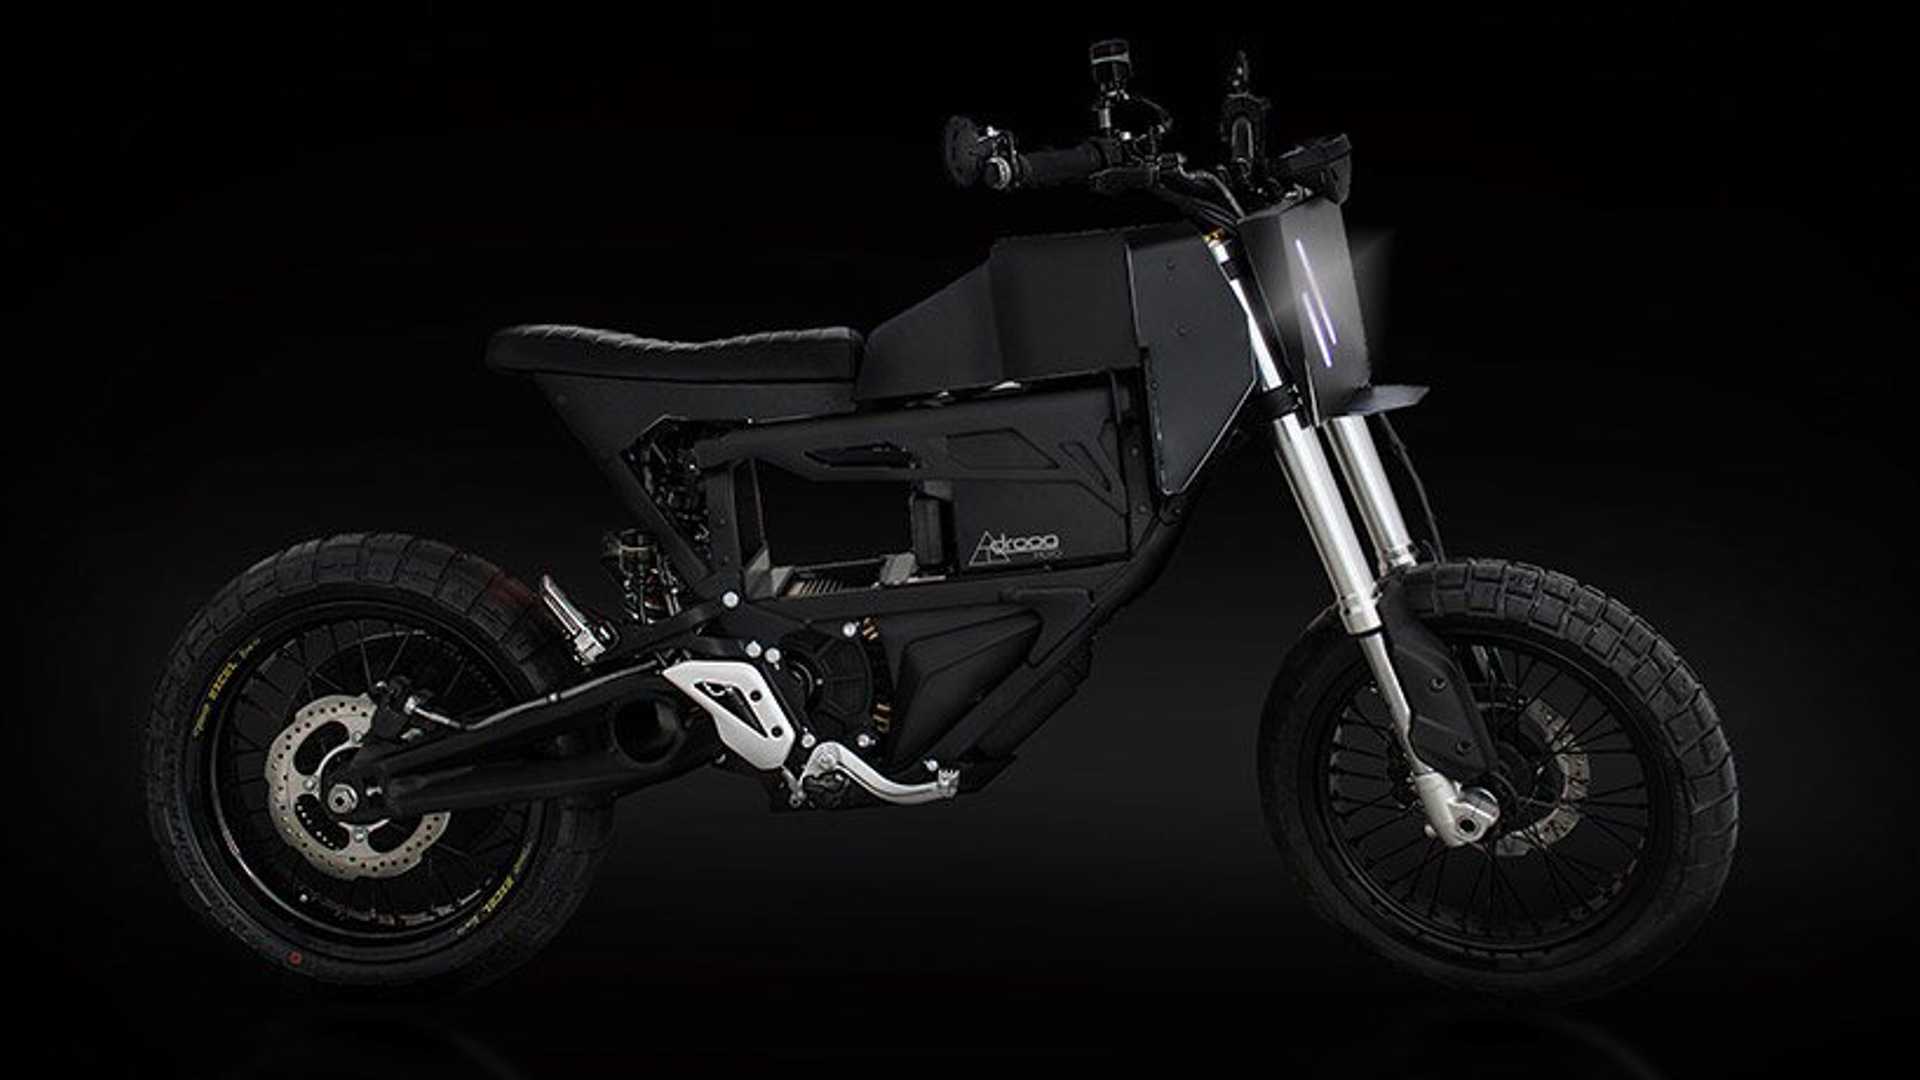 Electric streetfighter
- also in the APP MOTORCYCLE NEWS